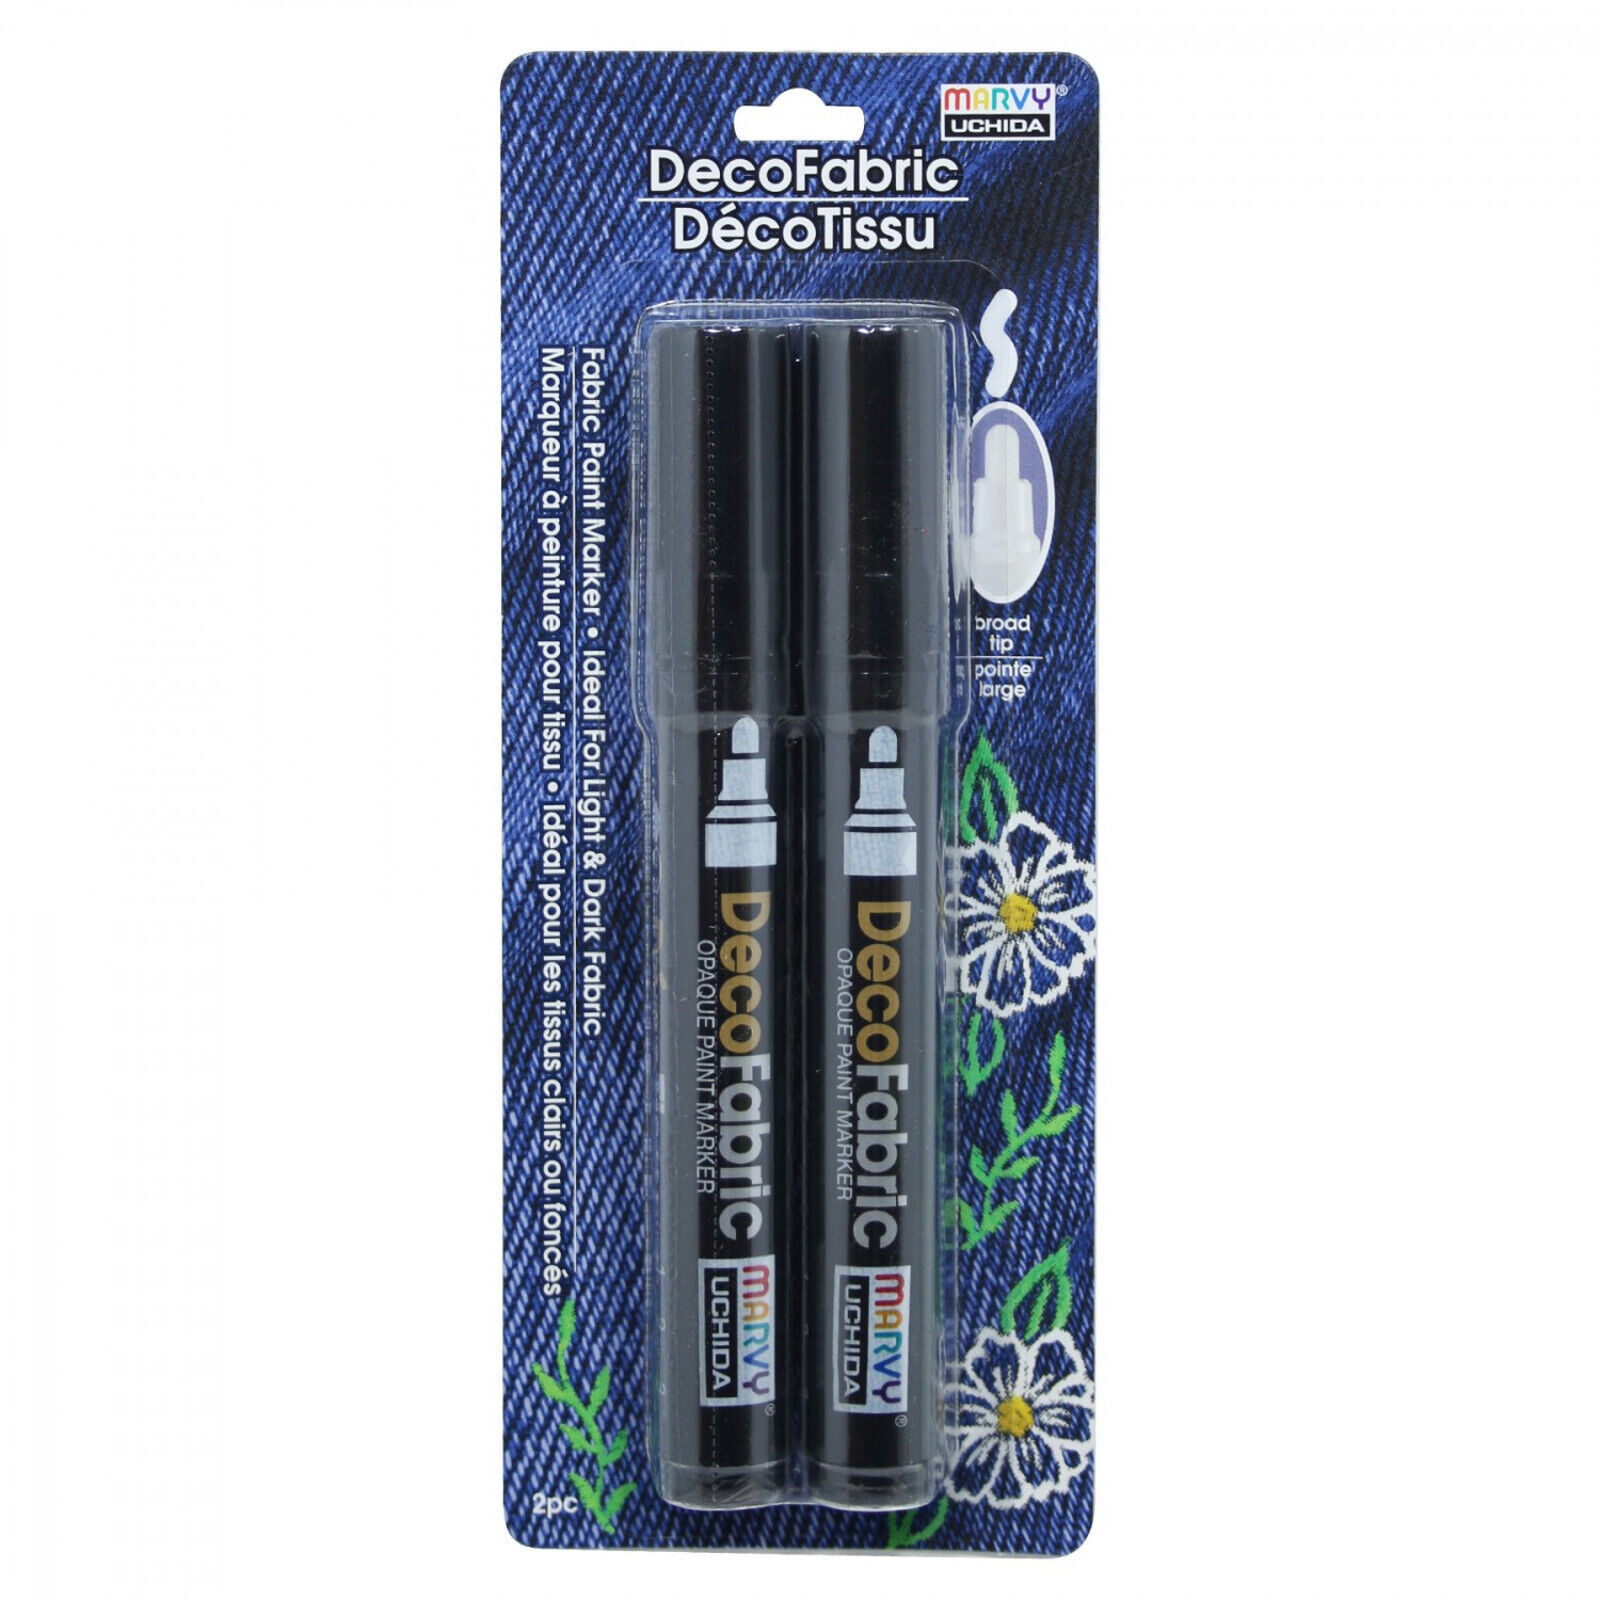 Clover Water Soluble Fabric Marker Fine Blue